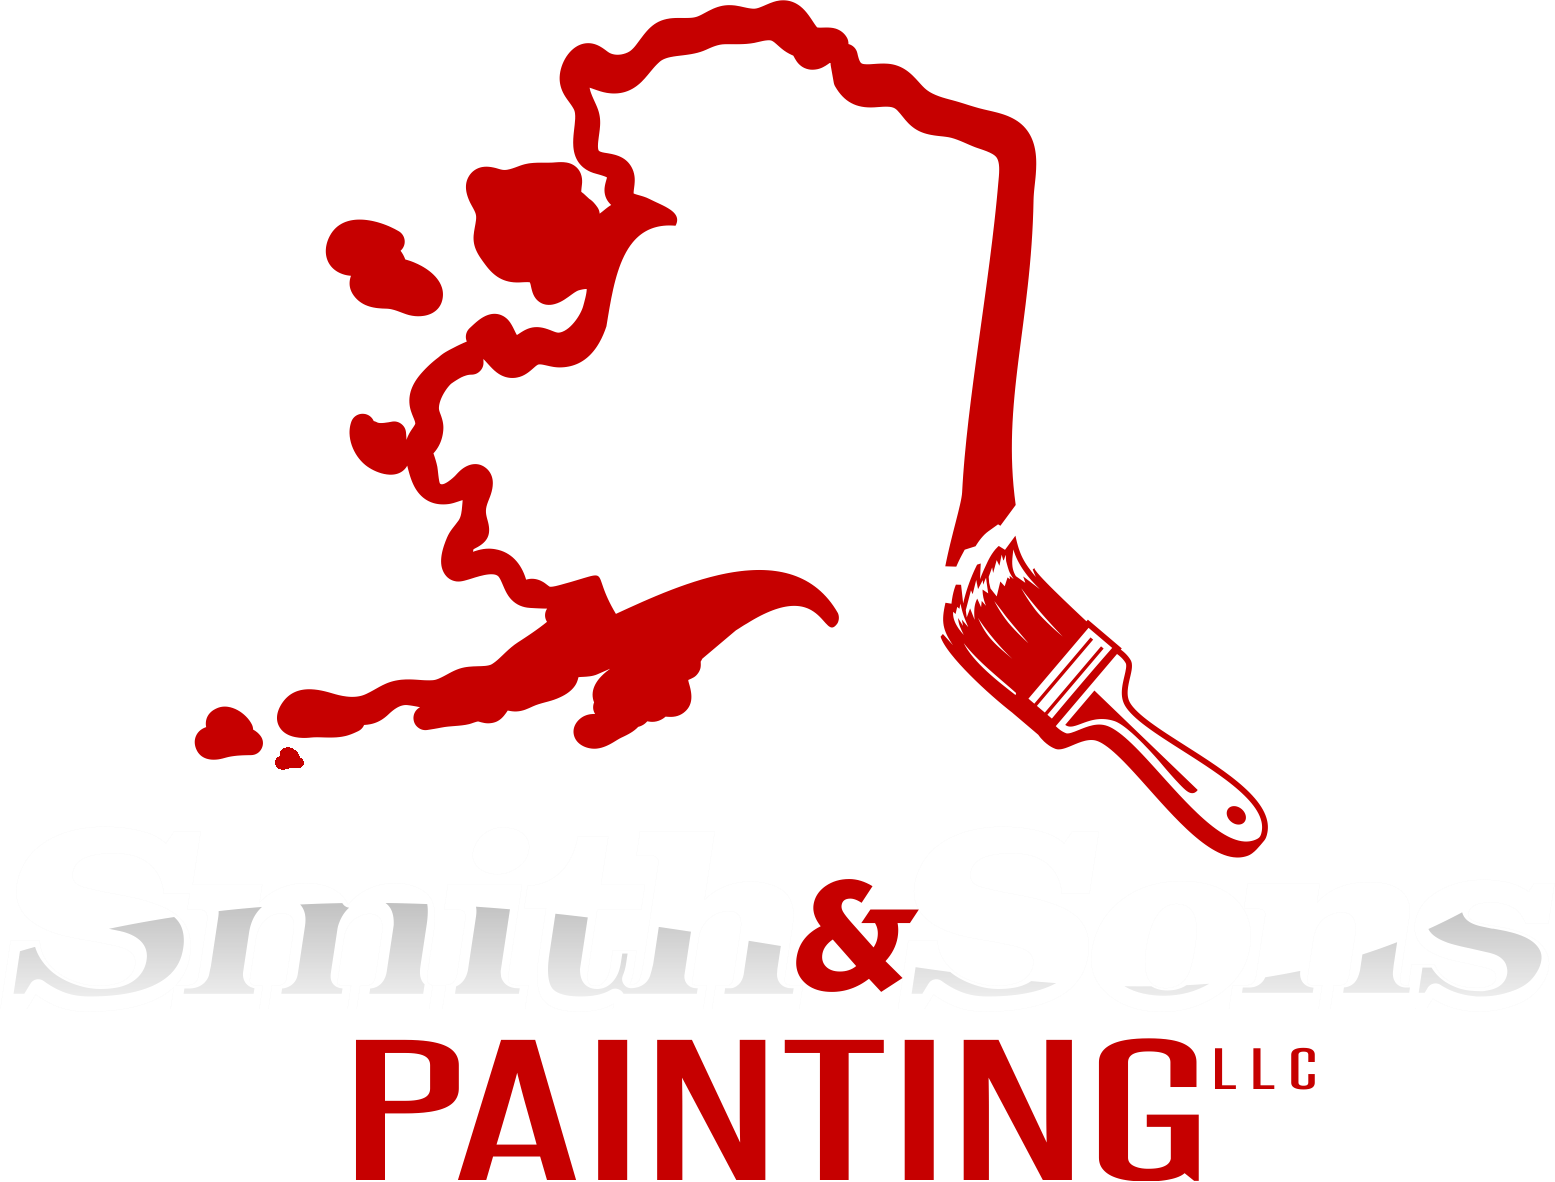 Smith & Sons Painting LLC